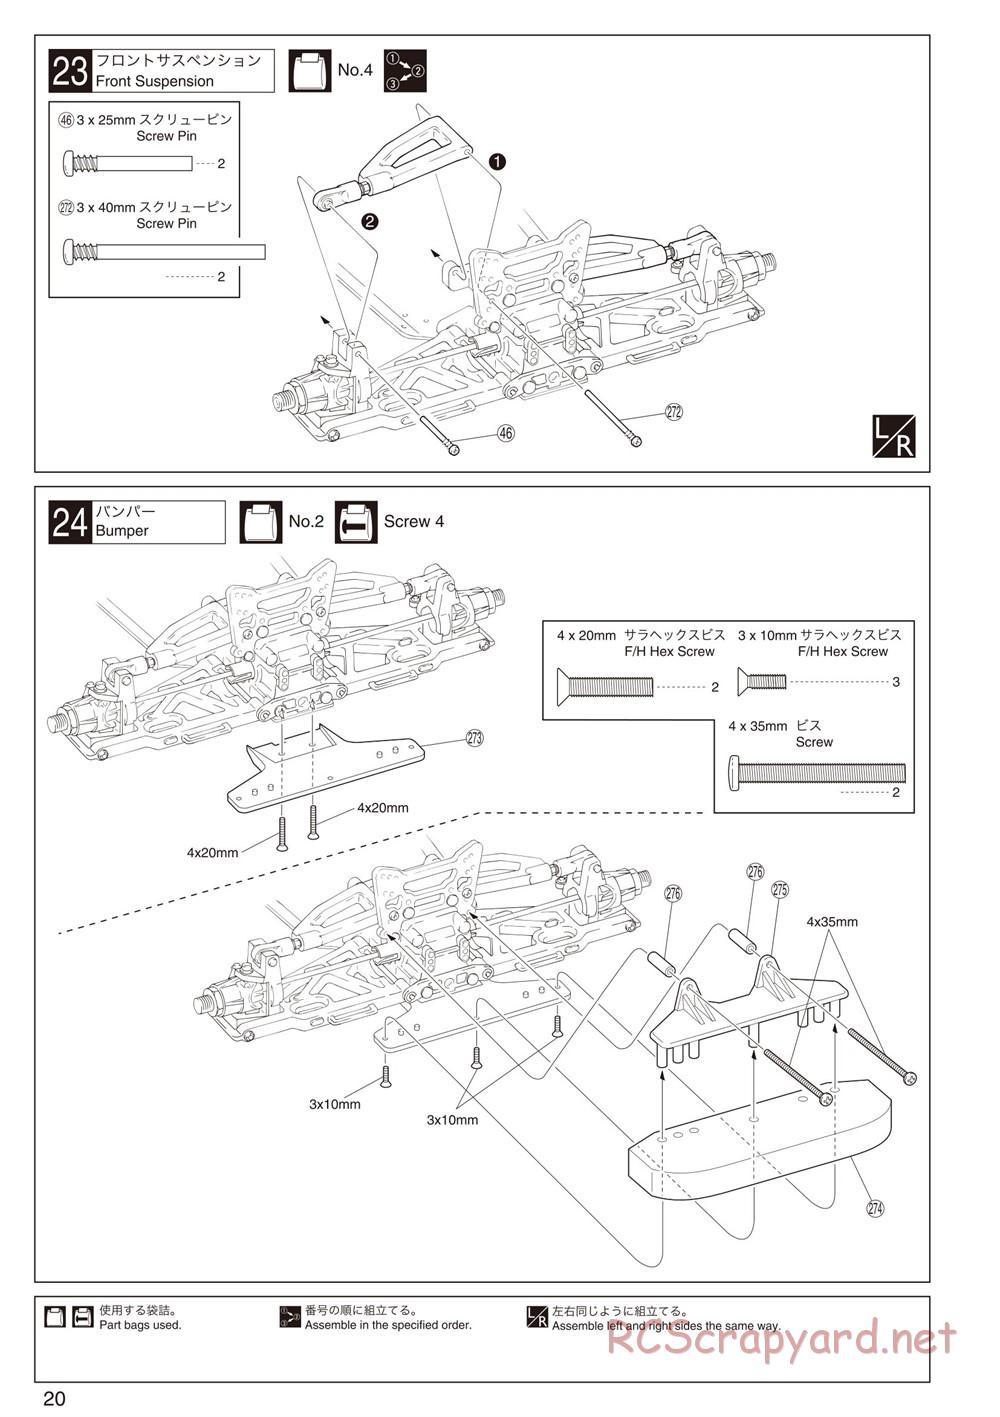 Kyosho - Inferno GT2 - Manual - Page 20